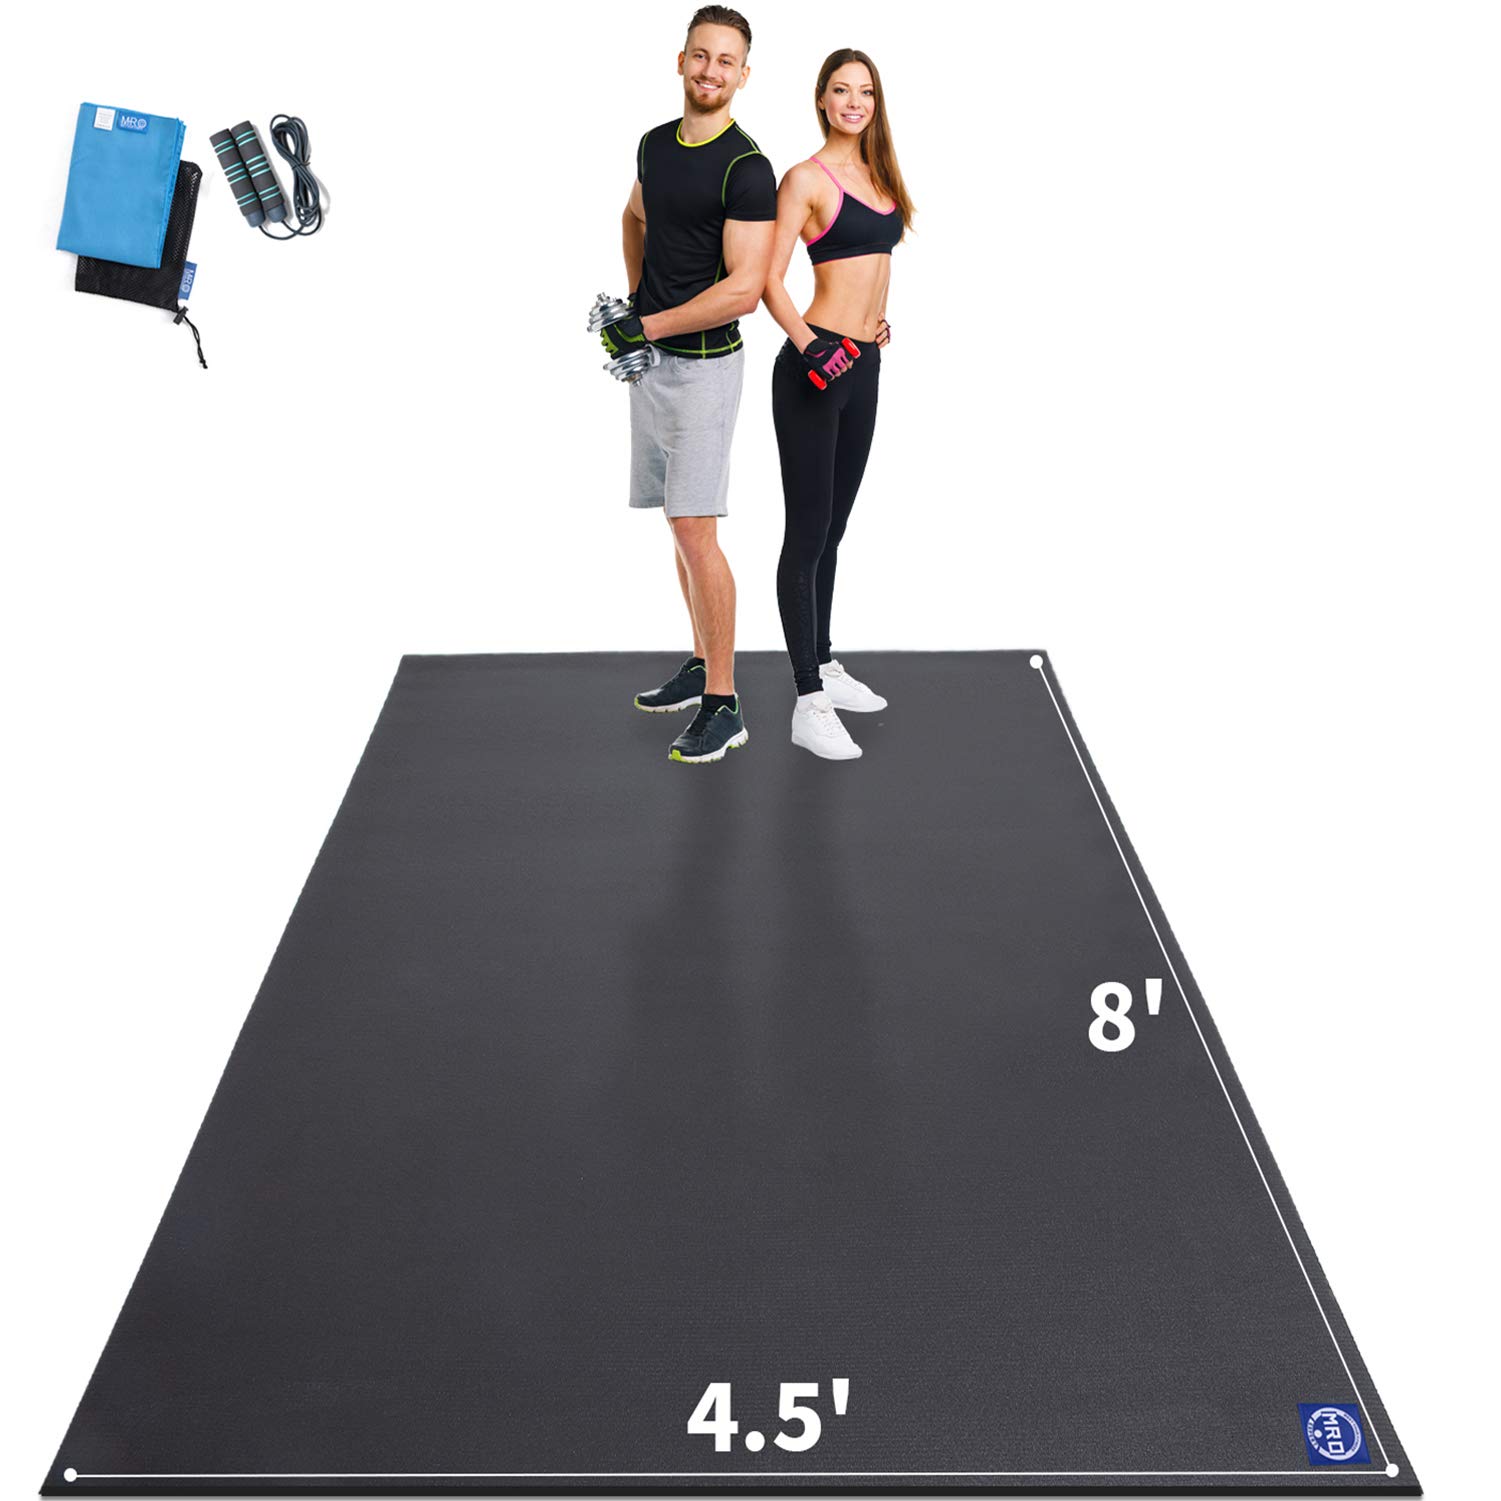 Extra Large Exercise Mat for Home Workout 96 x 54 inch Workout Mats for Home Gym Flooring Thick Ultra Durable Cardio Mat I